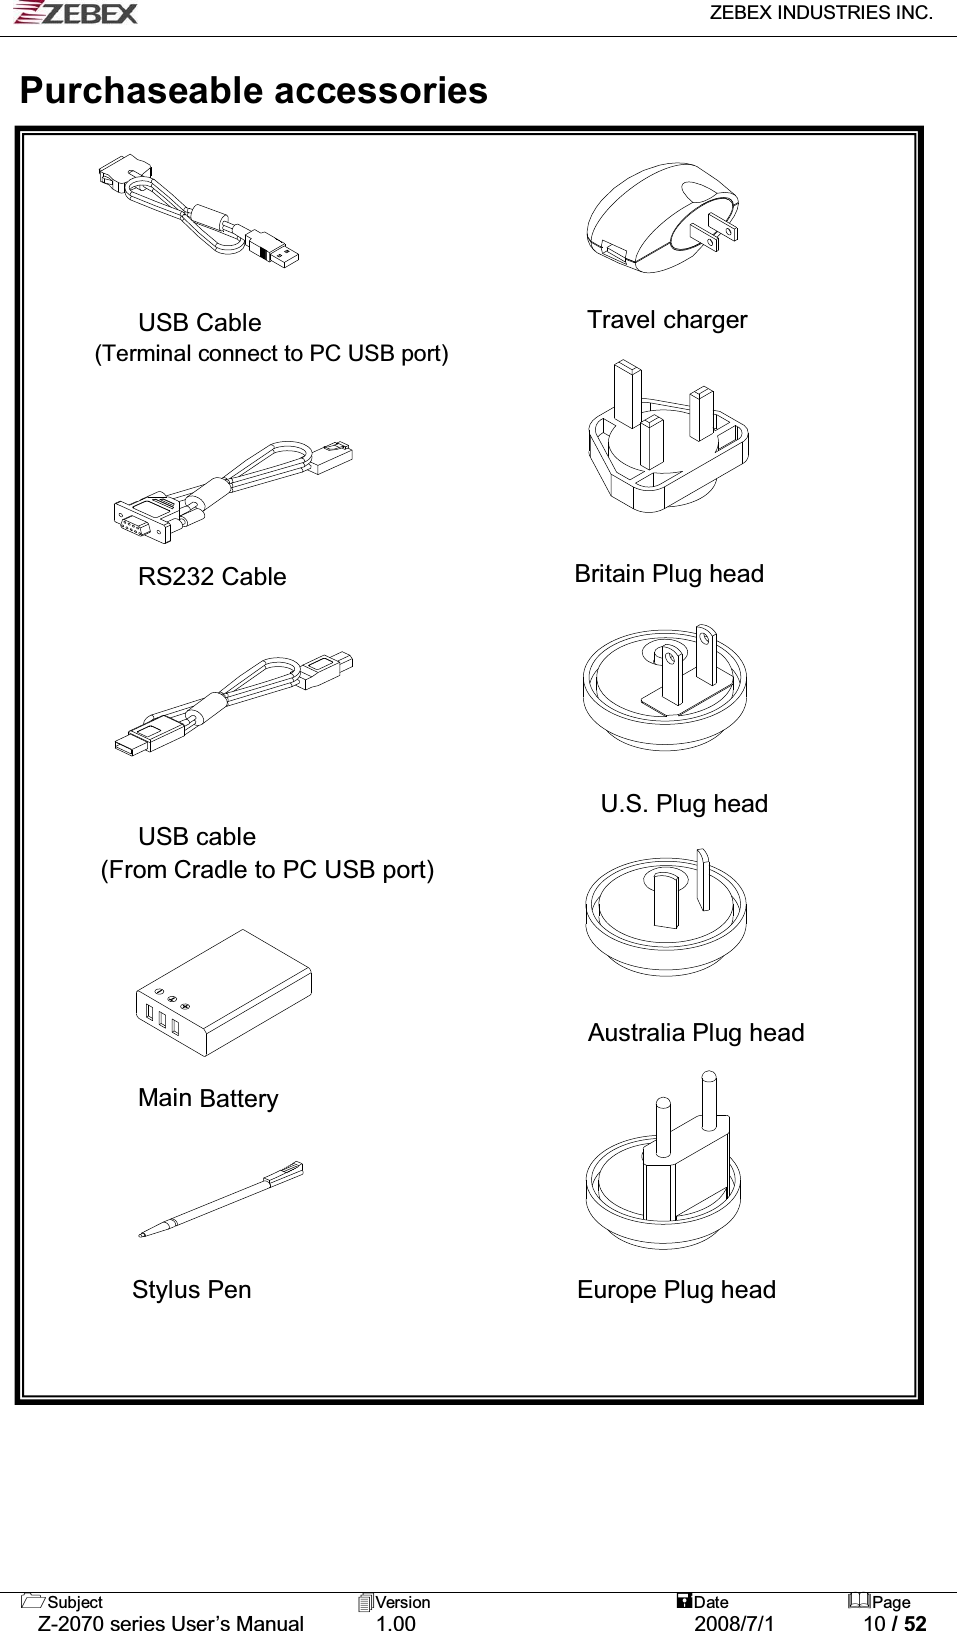   ZEBEX INDUSTRIES INC.   Subject Version  Date Page   Z-2070 series User’s Manual  1.00  2008/7/1  10 / 52  Purchaseable accessories         USB Cable                          Travel charger         (Terminal connect to PC USB port)                                                                               RS232 Cable                       Britain Plug head                      U.S. Plug head         USB cable   (From Cradle to PC USB port)     Australia Plug head     Main Battery                             Stylus Pen                          Europe Plug head                             